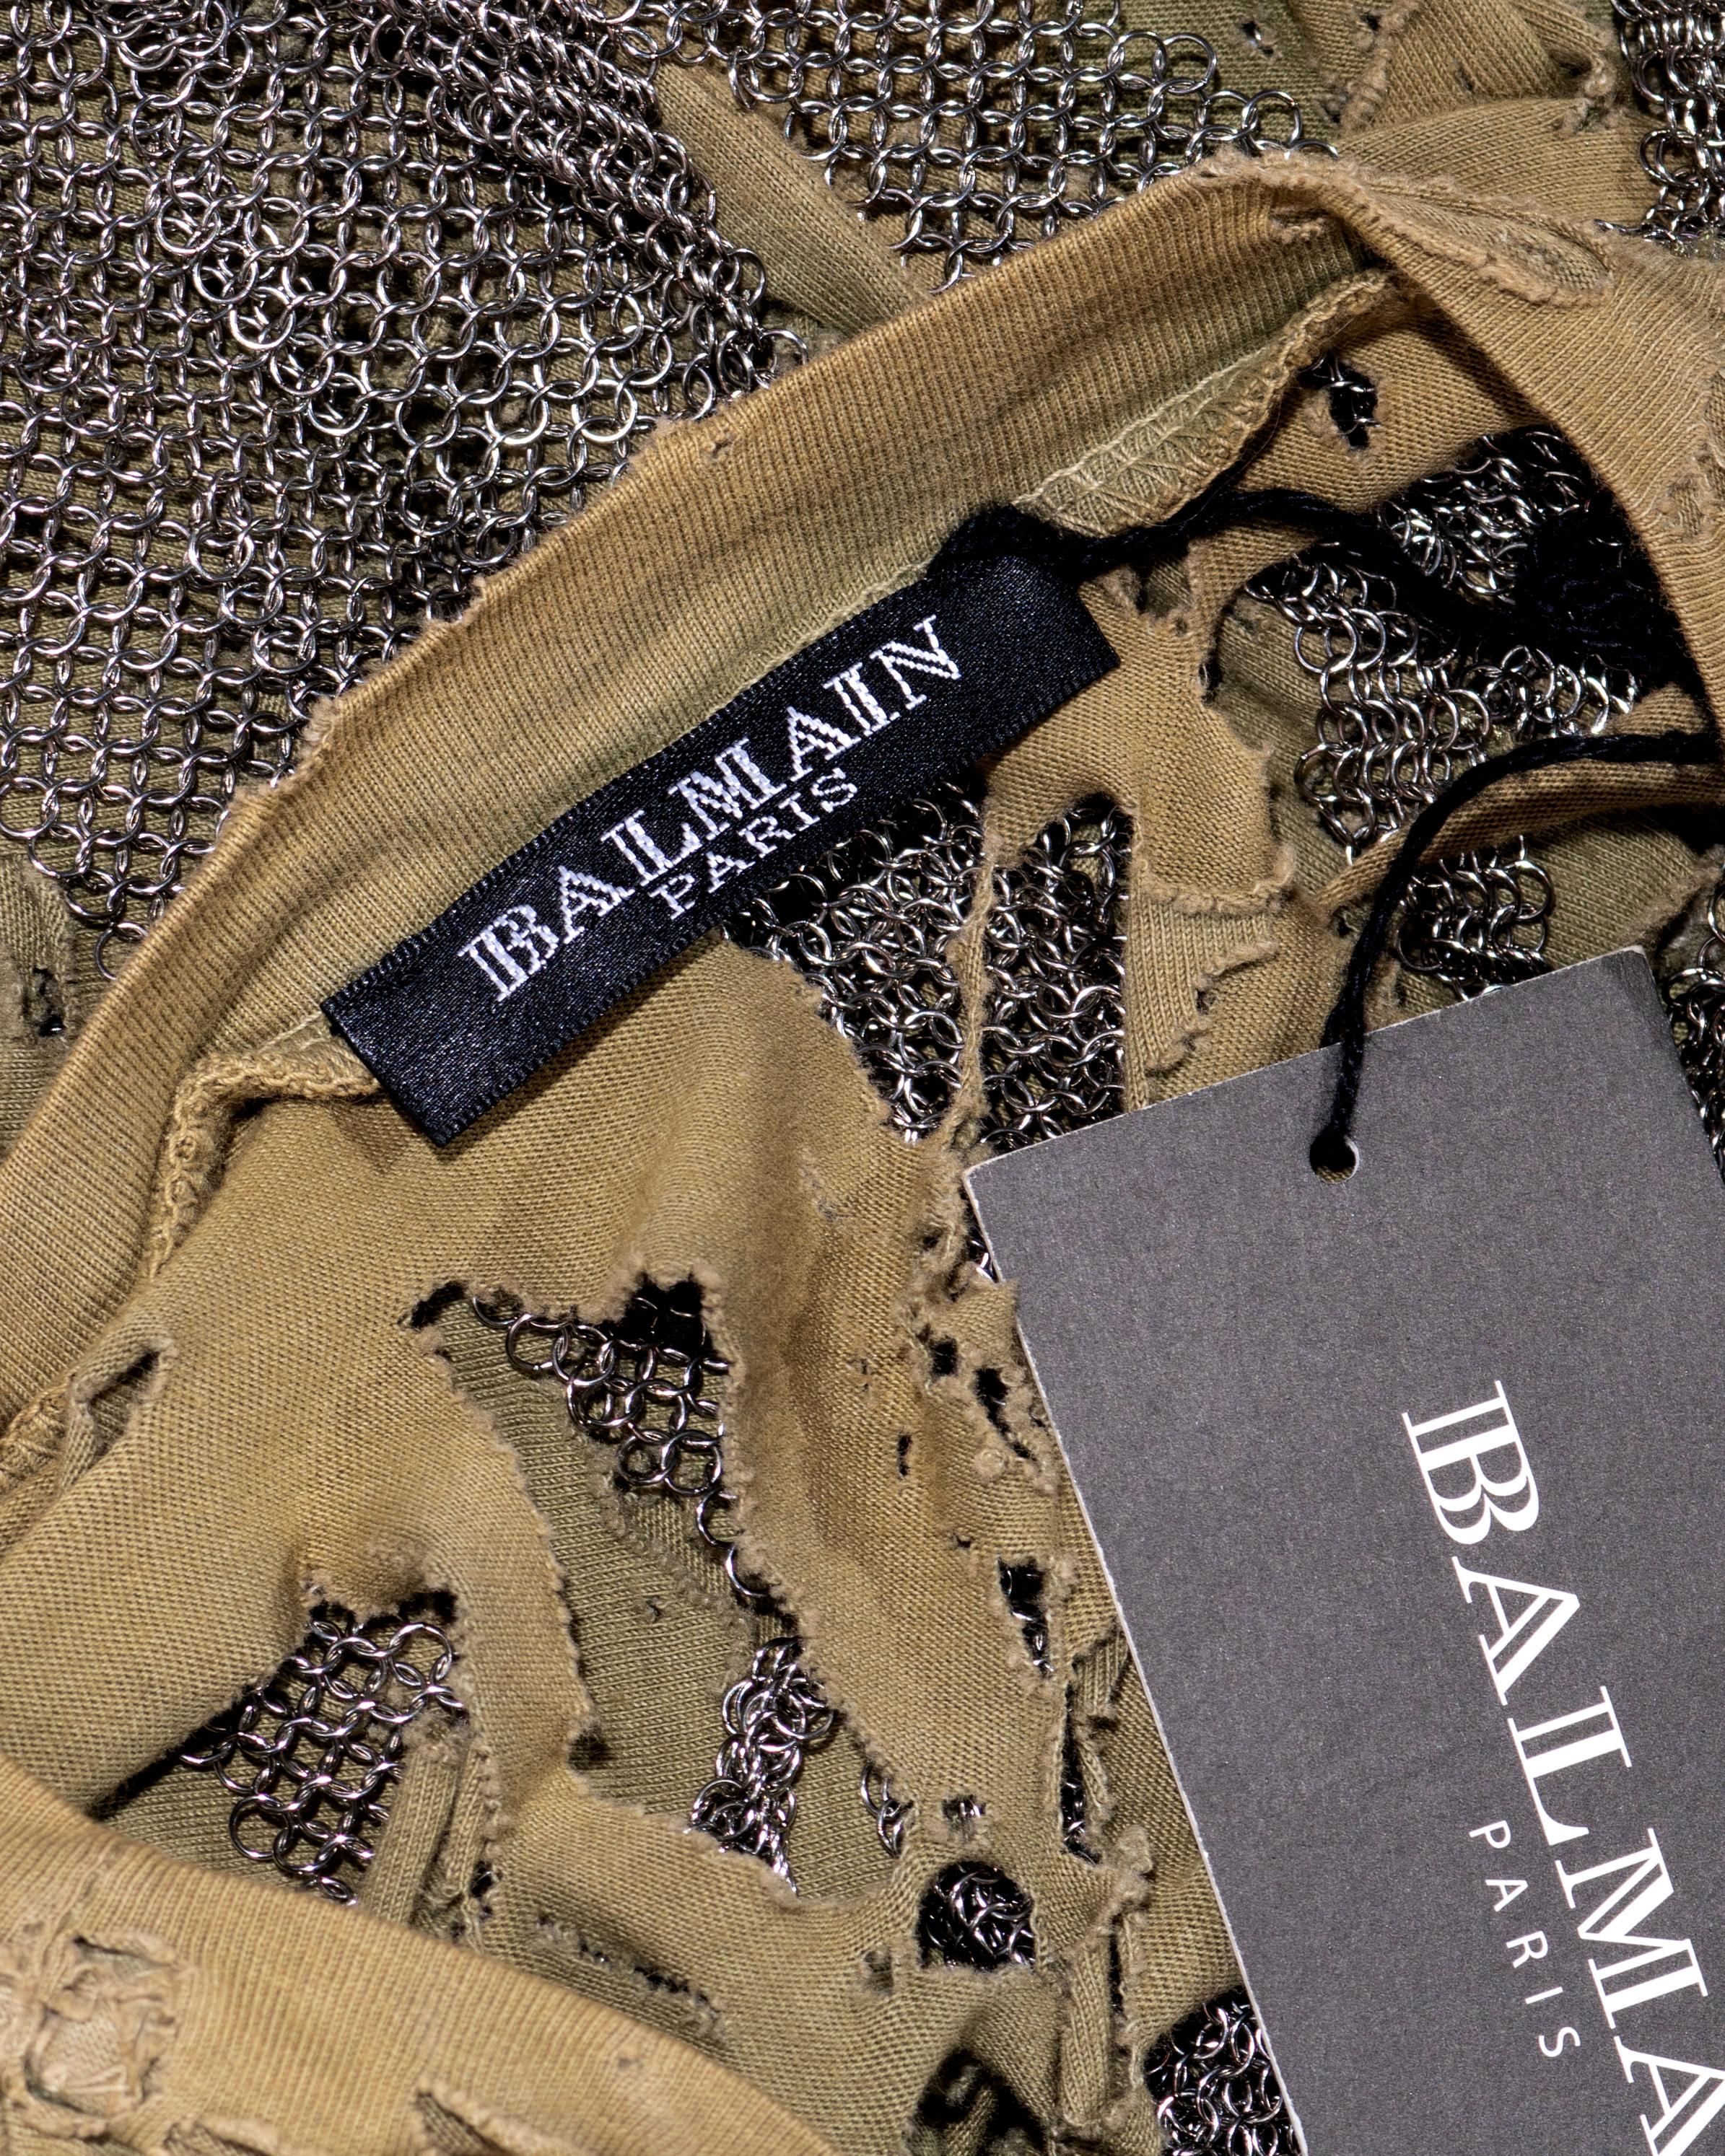 Balmain by Christophe Decarnin destroyed jersey and metal mini dress, ss 2010 For Sale 2